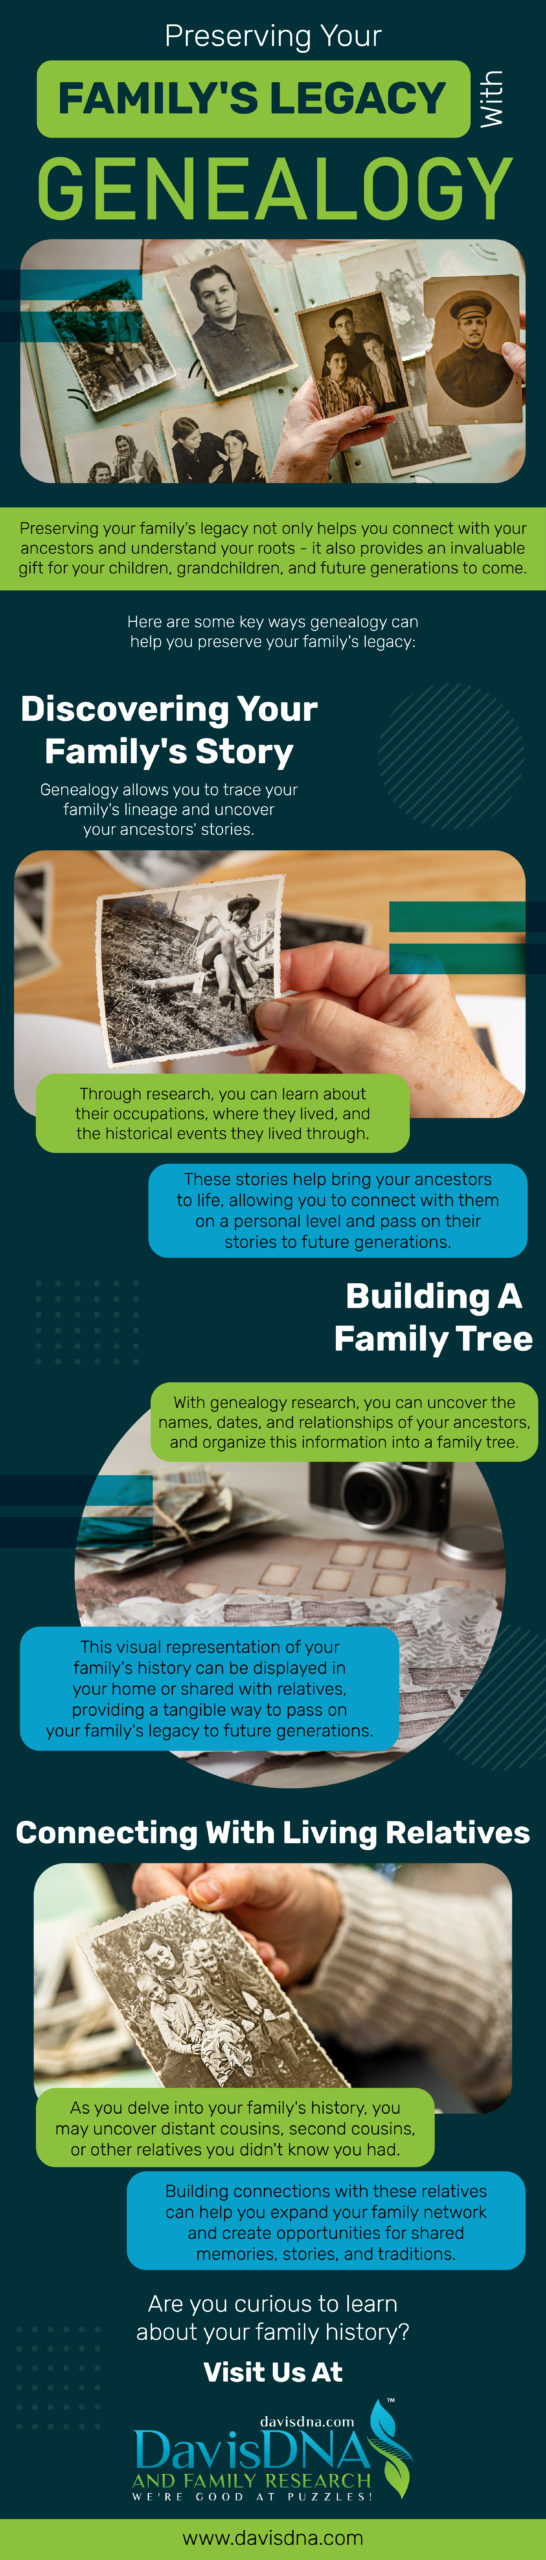 Preserving Your Family's Legacy With Genealogy